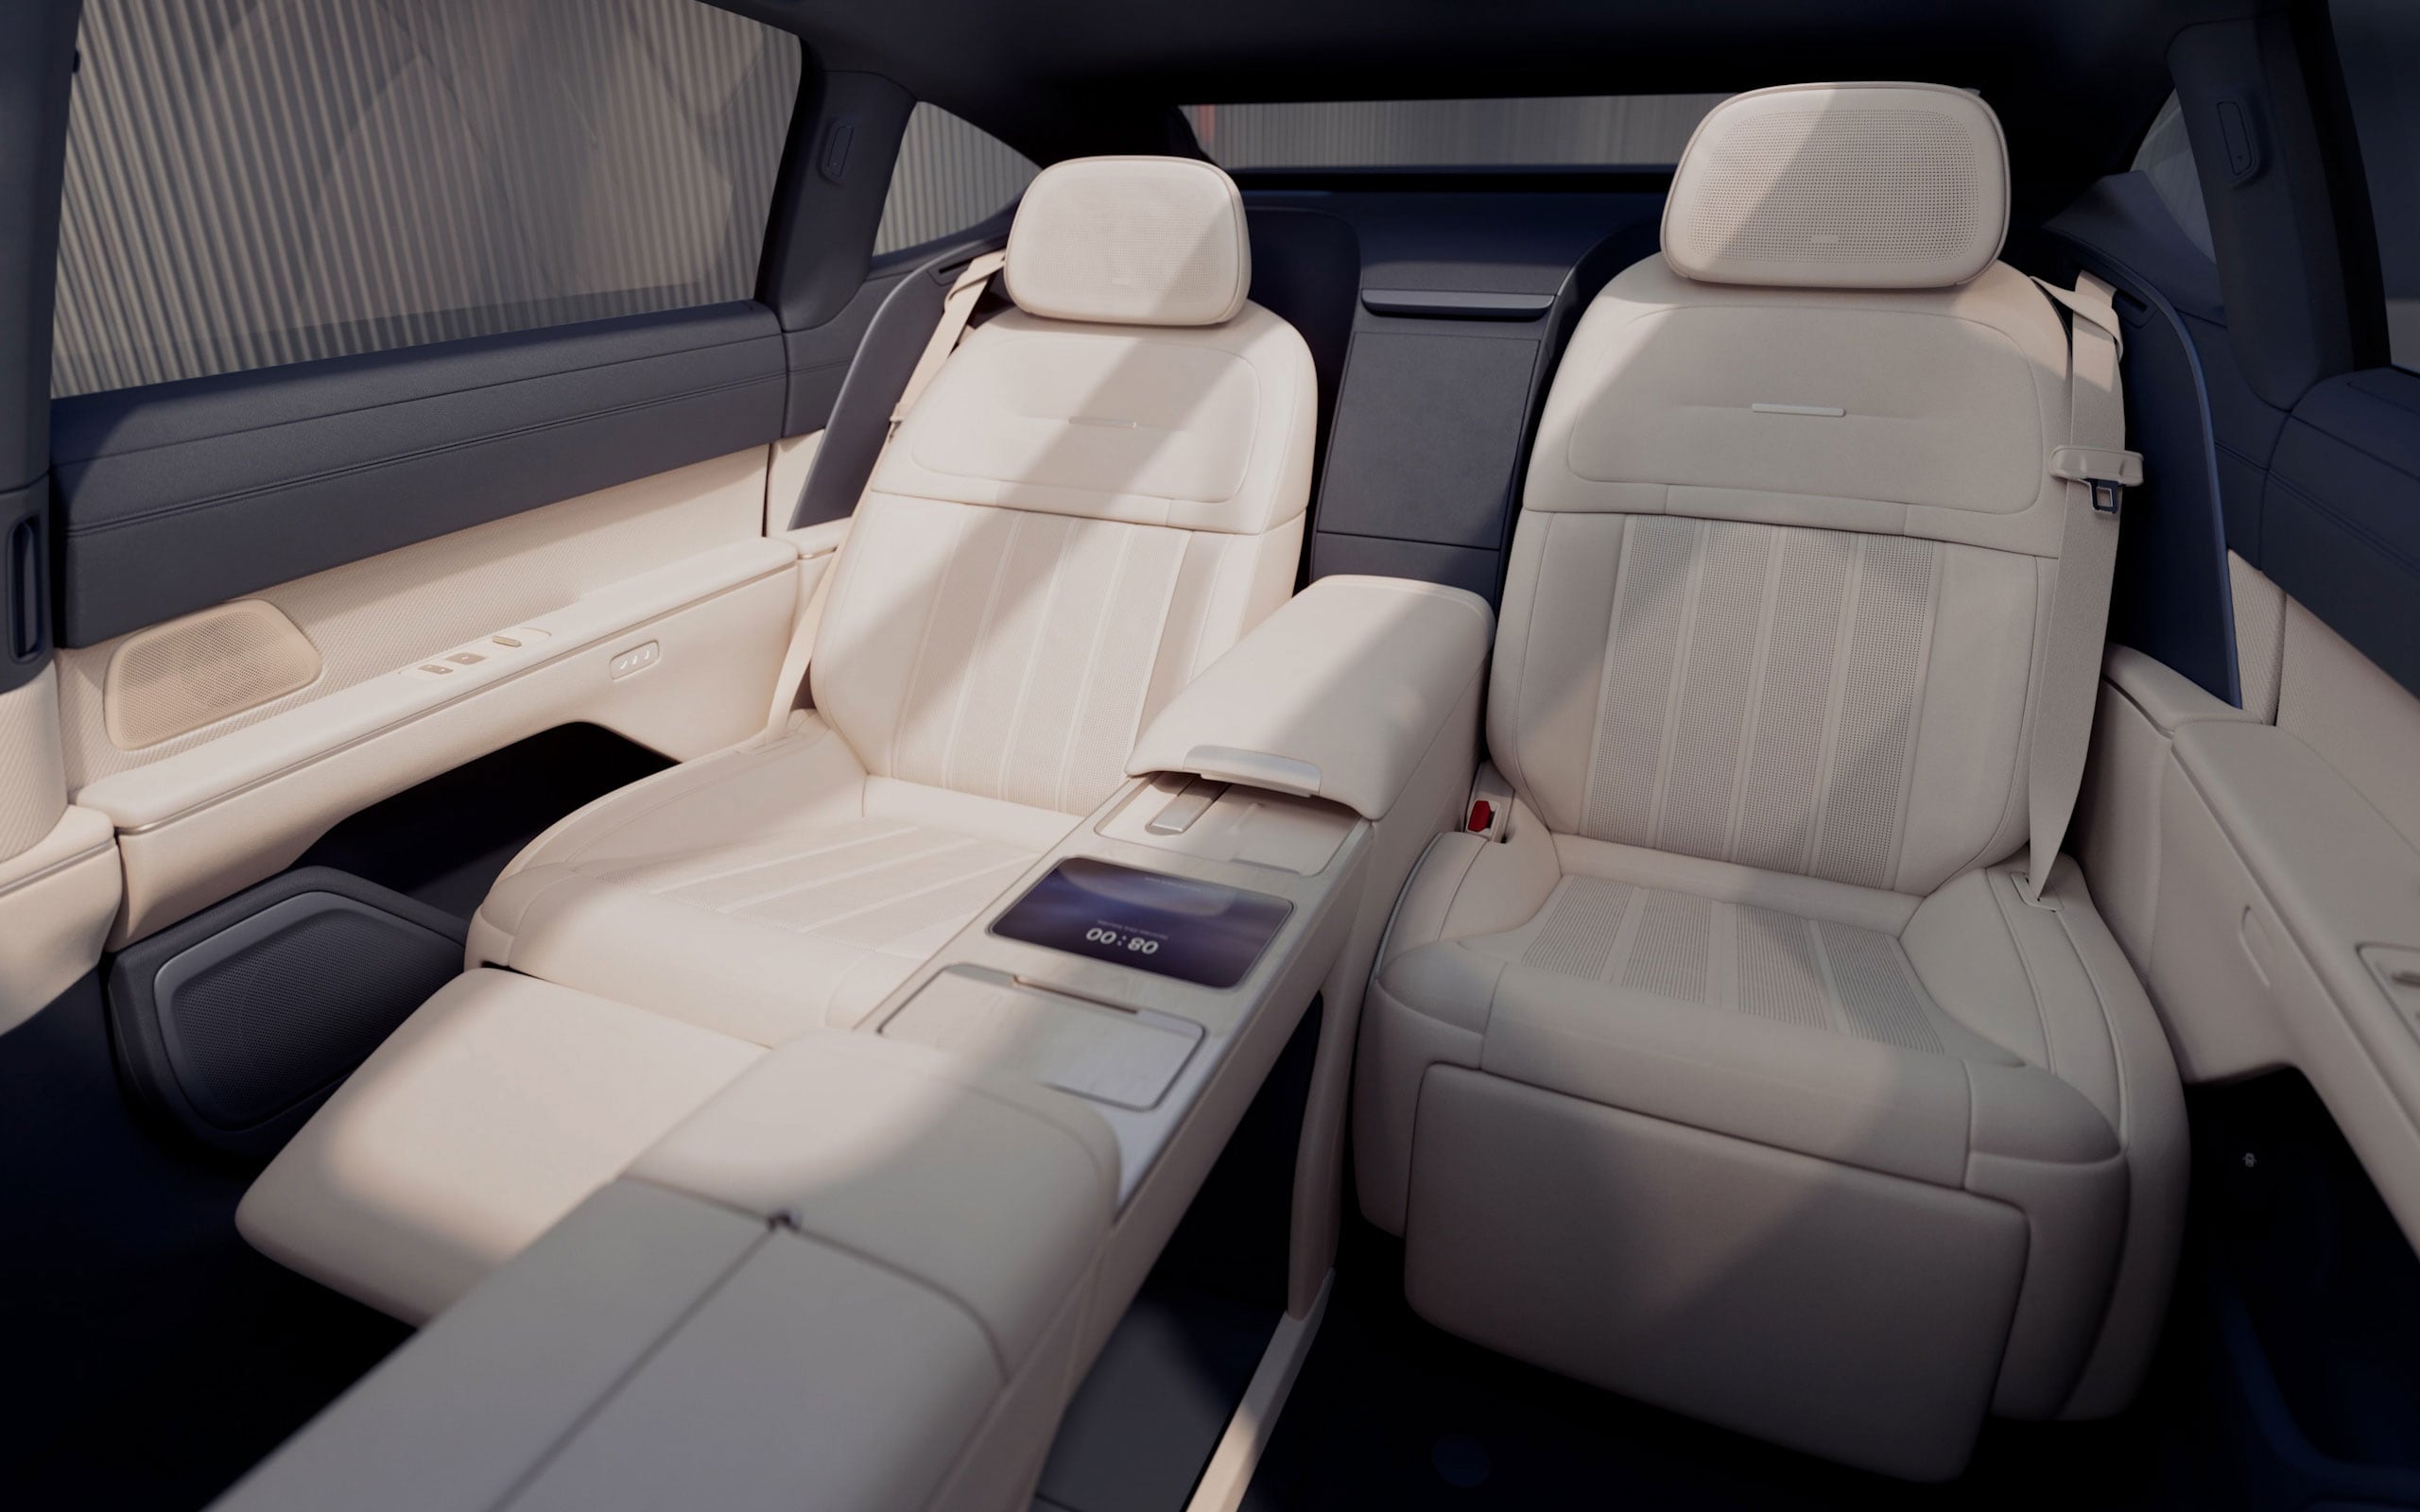 Enabled by 24 patented technologies, NIO's proprietary seat structure provides every occupant a cocooning space full of care and comfort.